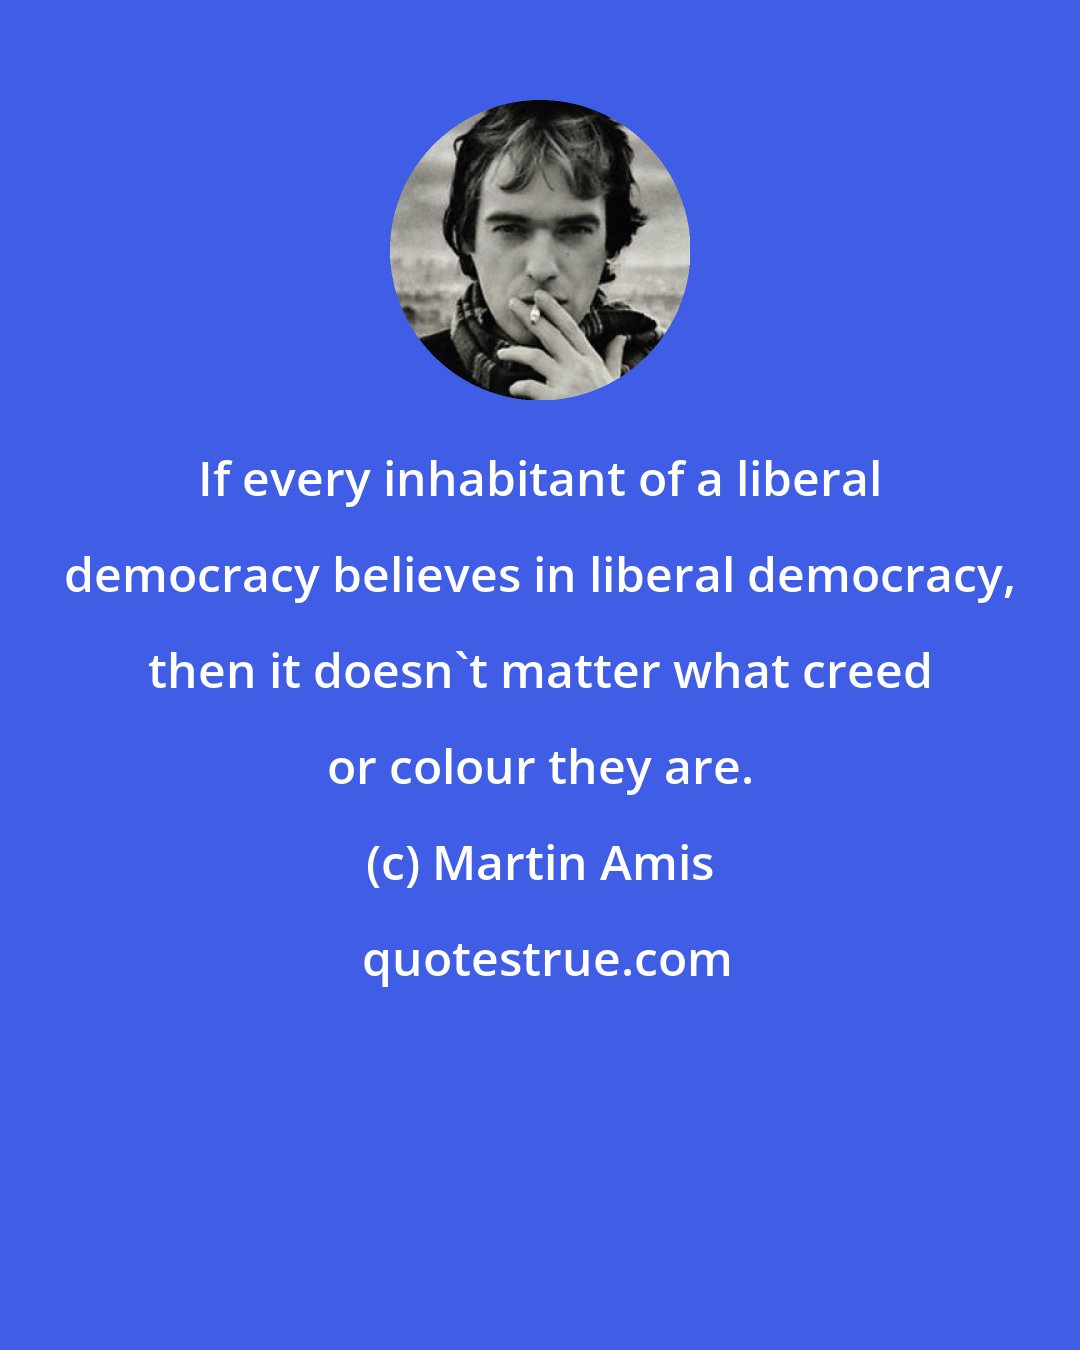 Martin Amis: If every inhabitant of a liberal democracy believes in liberal democracy, then it doesn't matter what creed or colour they are.